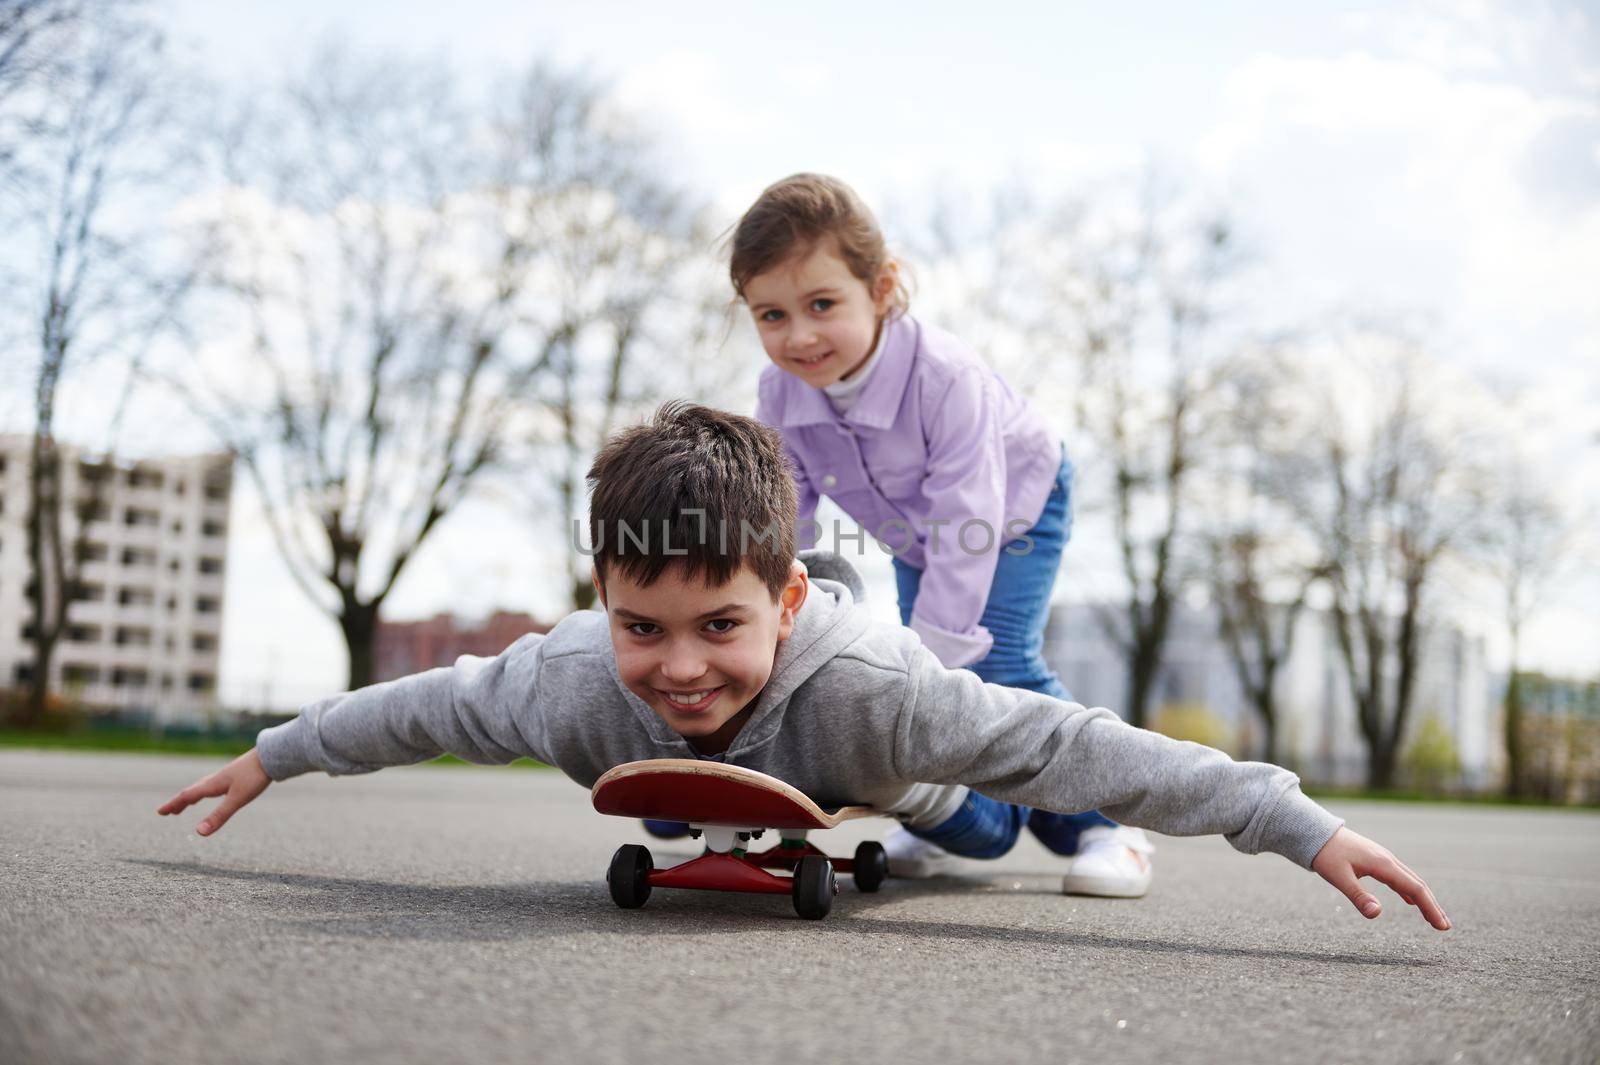 Smiling girl riding her brother on a wooden skateboard enjoying a game together on a sports ground by artgf